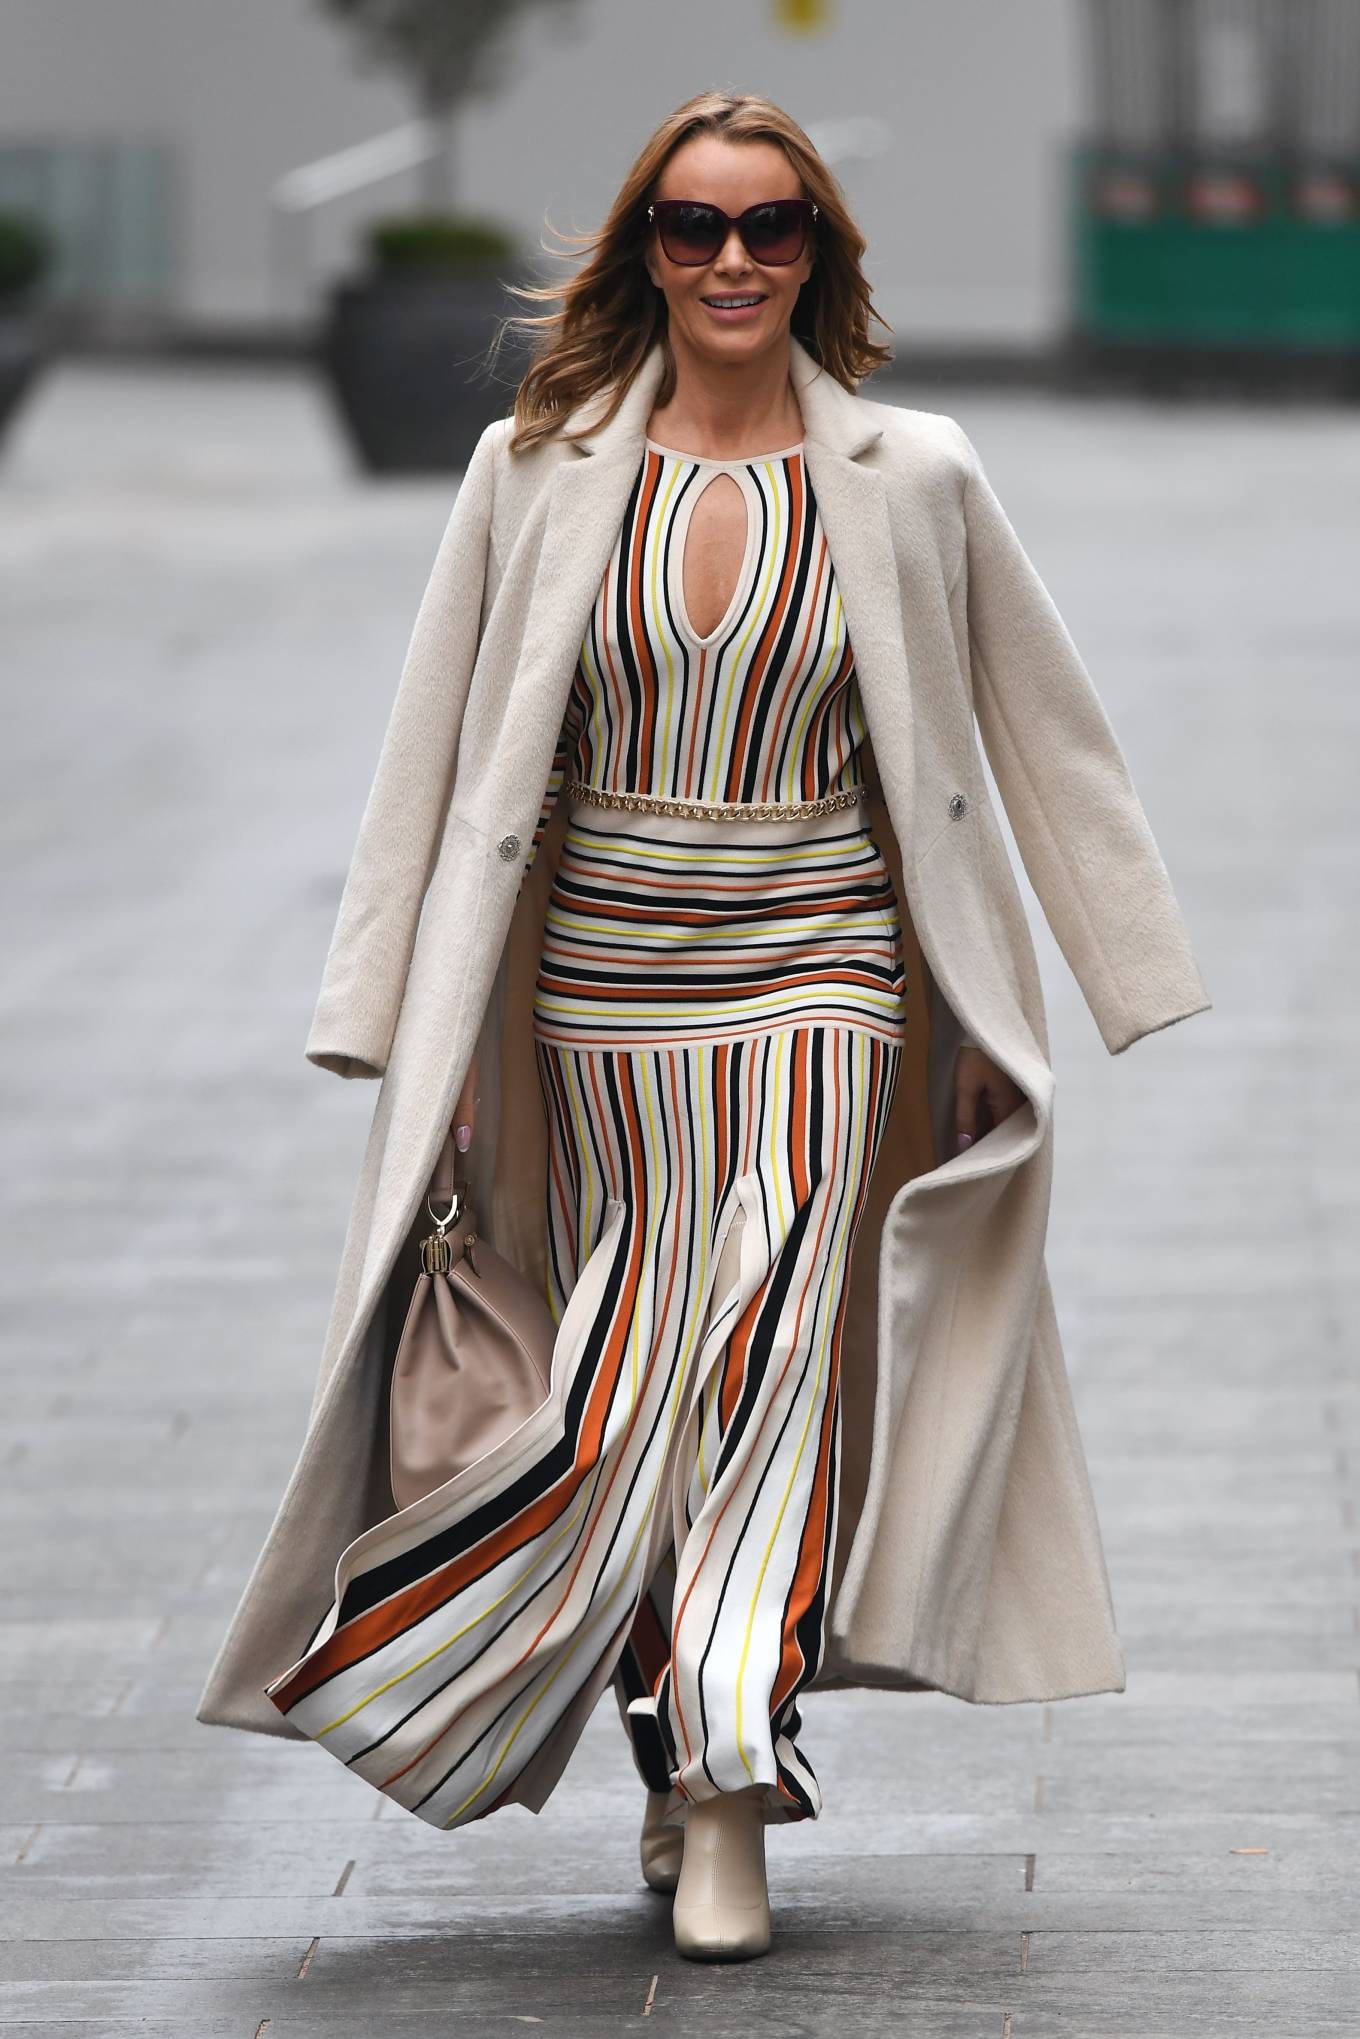 Amanda Holden – In striped dress and knee high boots in London